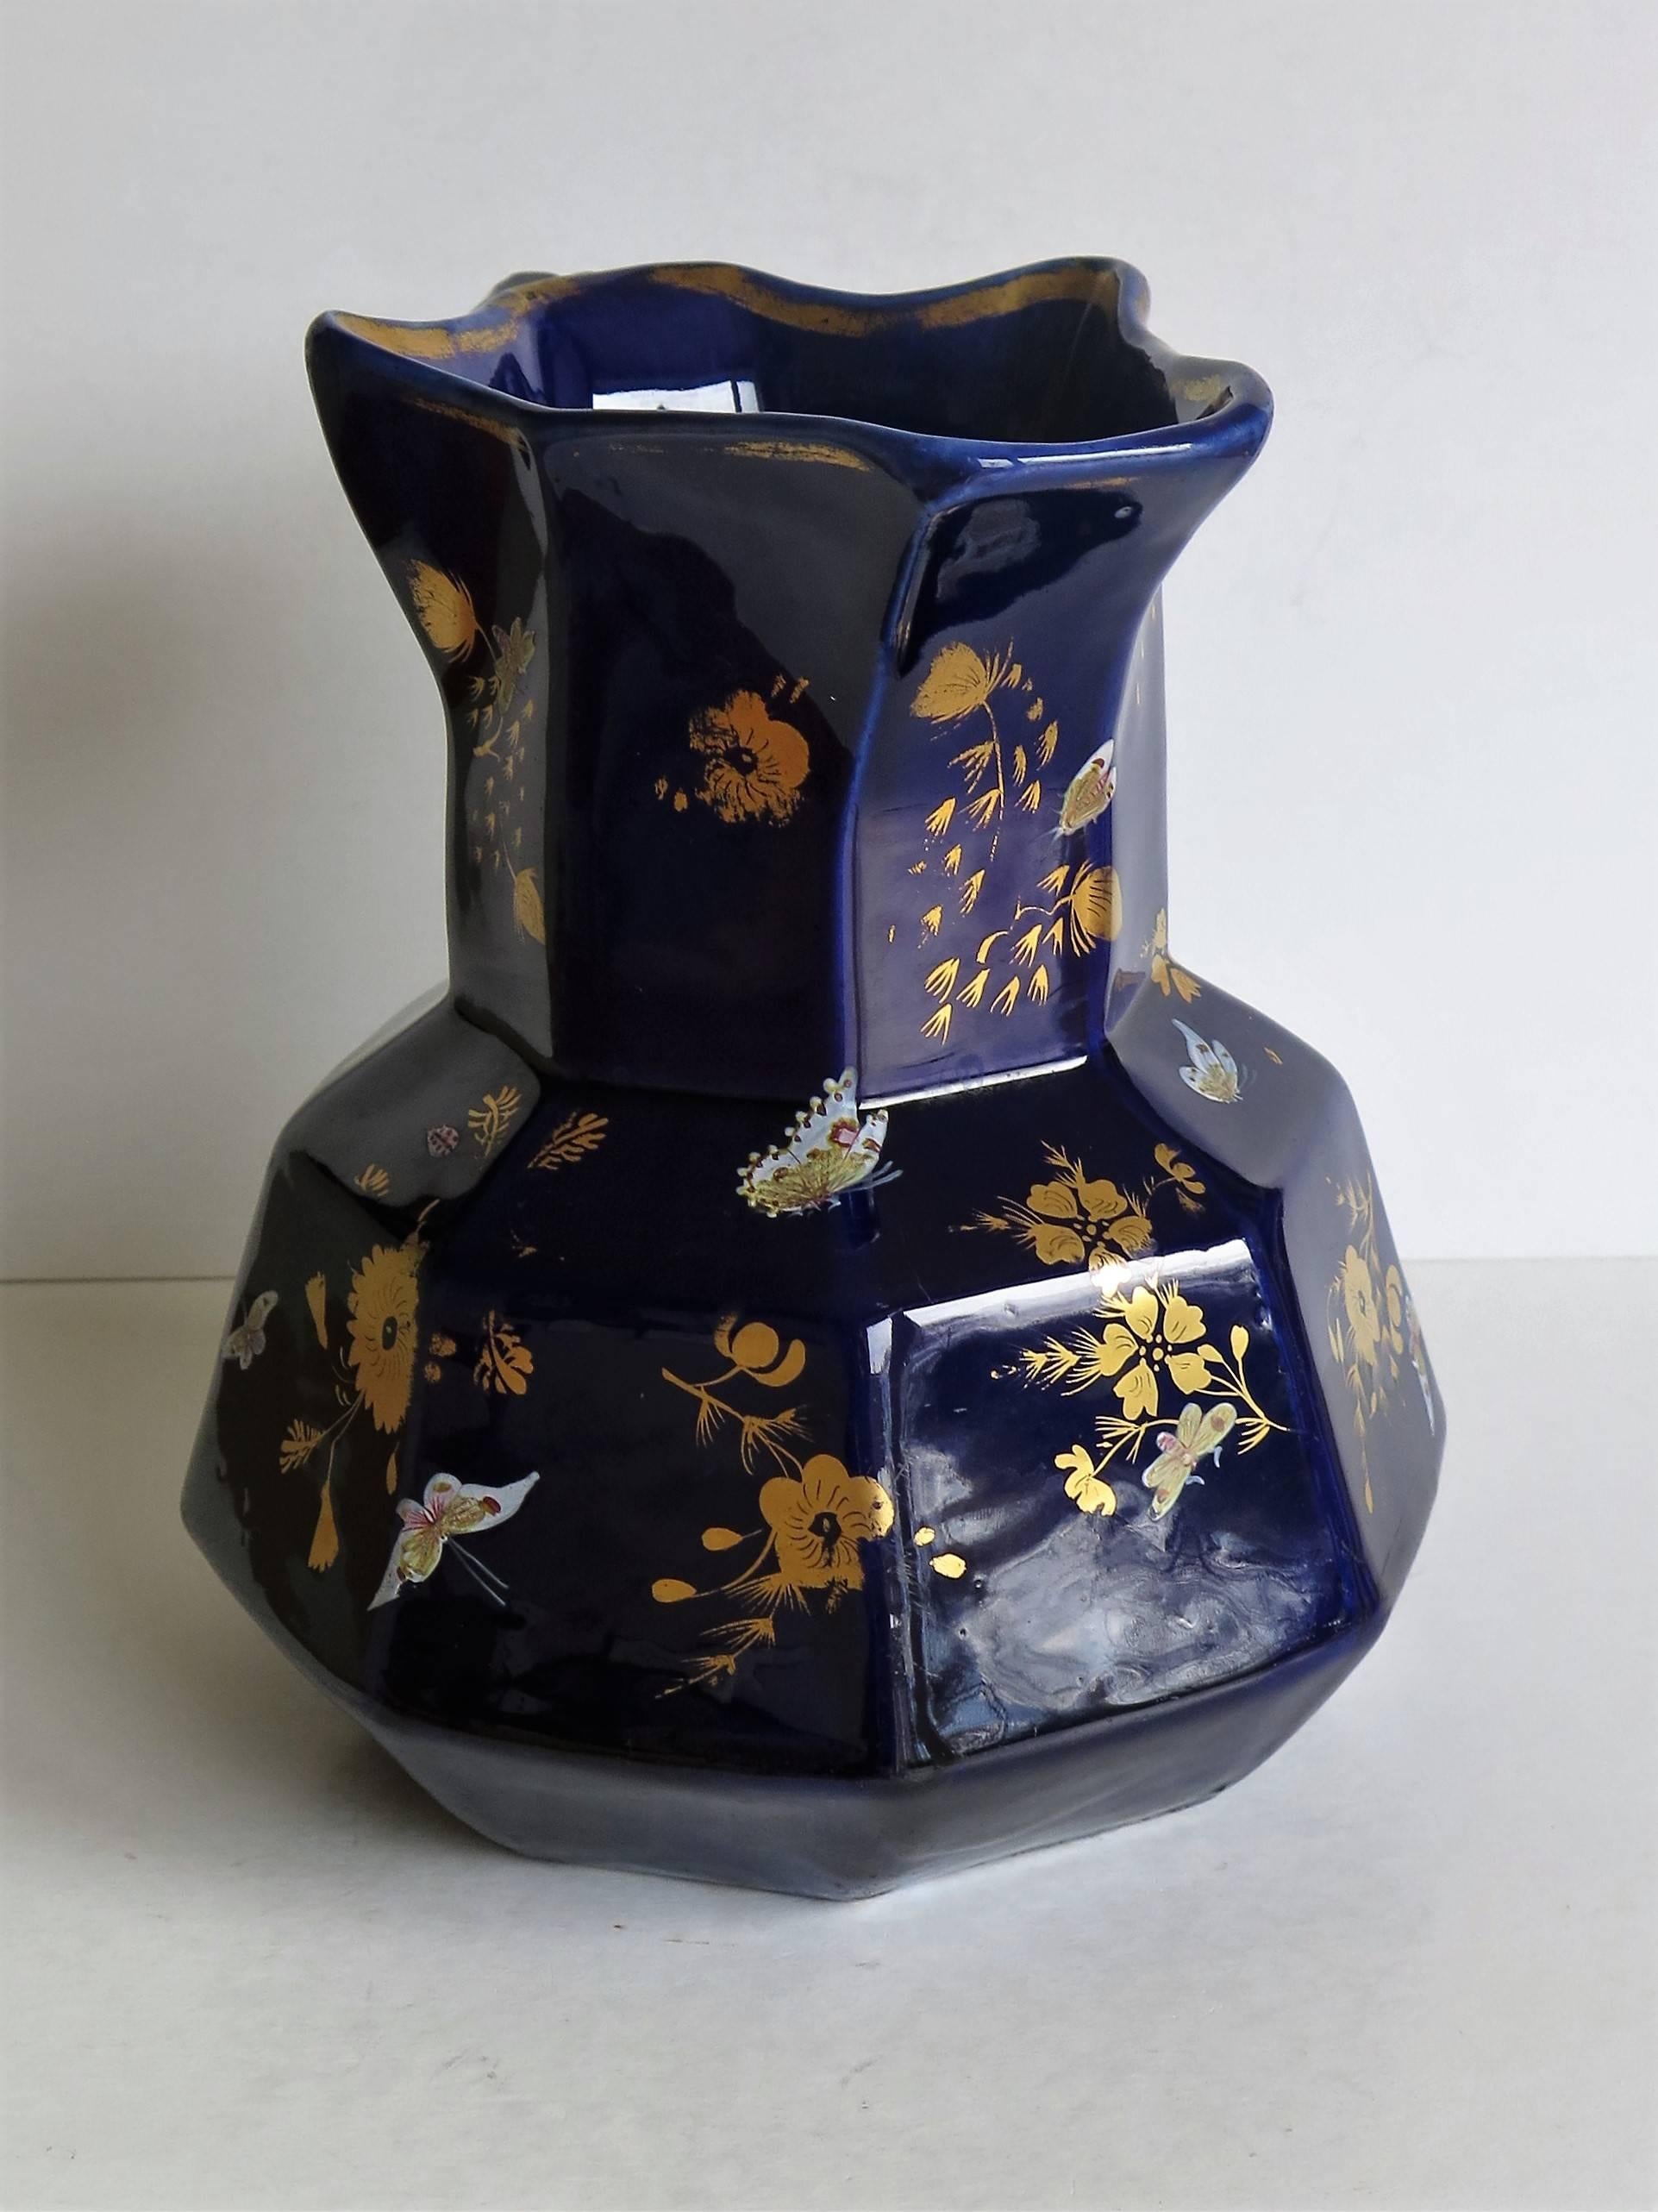 English Large Early Masons Ironstone Jug or Pitcher Hand-Painted Butterflies, Circa 1825